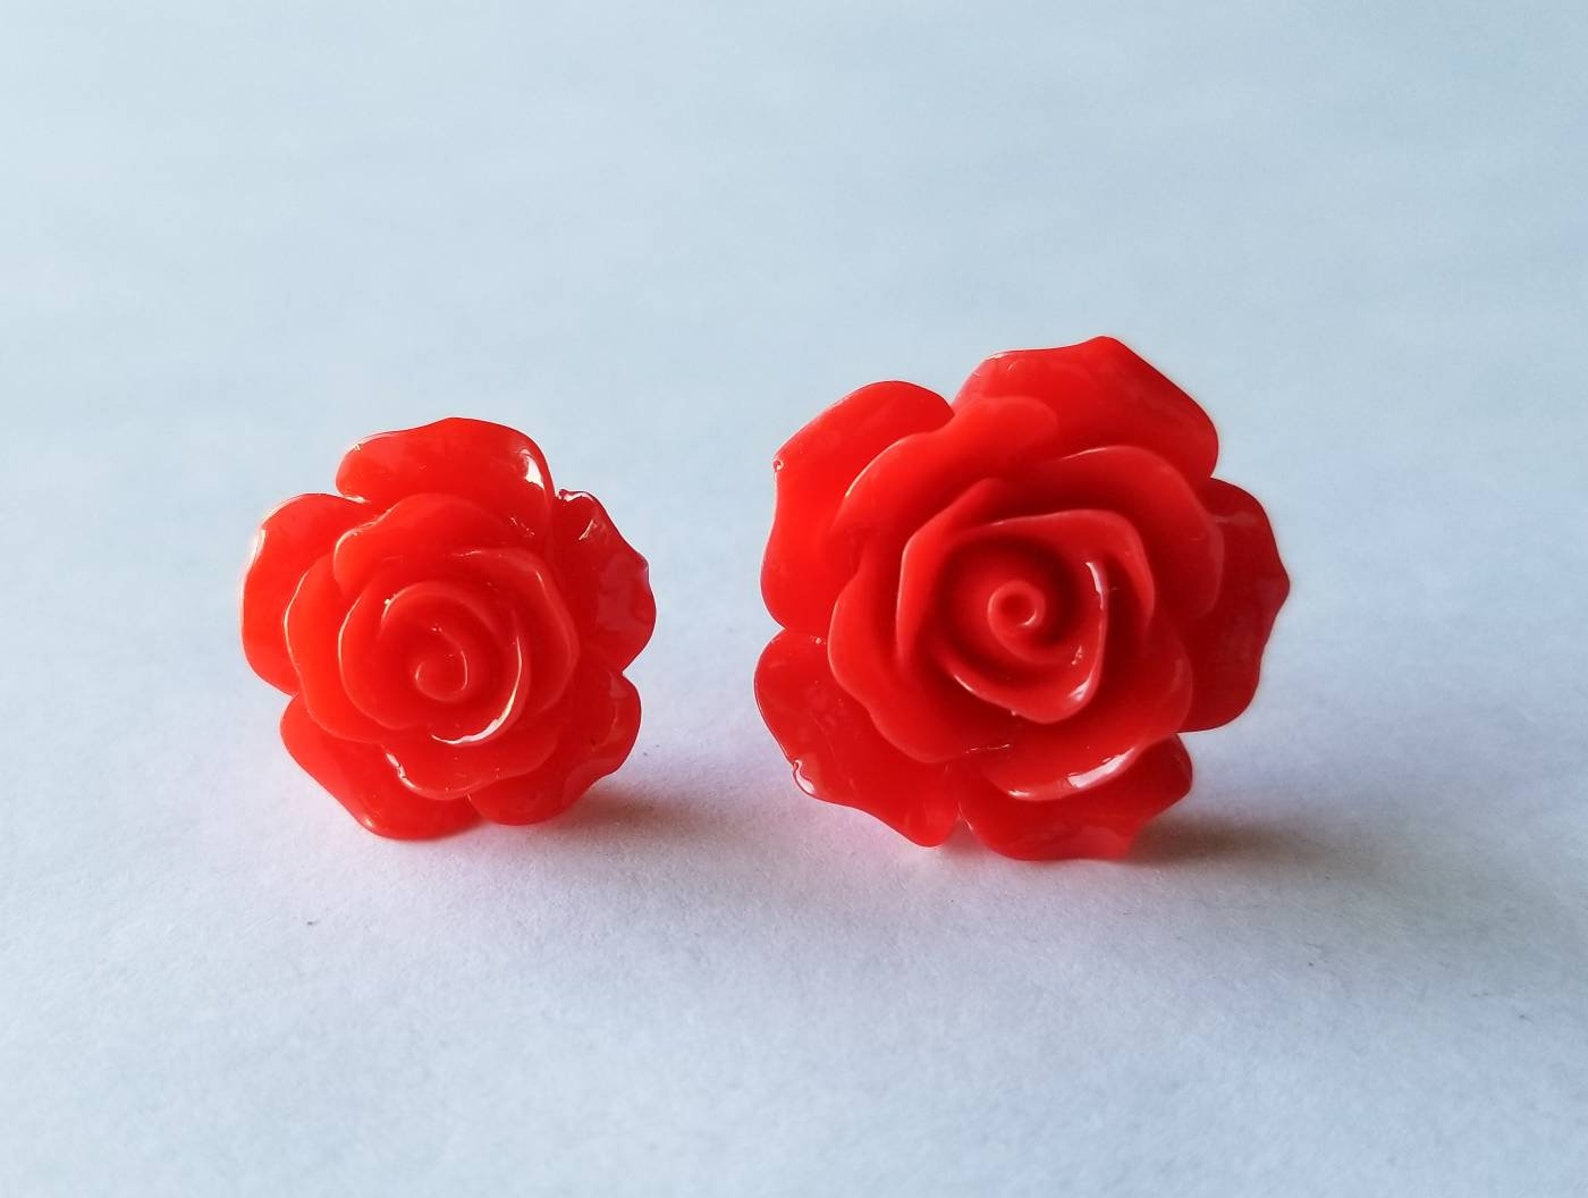 Bright Red Rose Earrings Your choice of Sizes Stud Earrings | Etsy